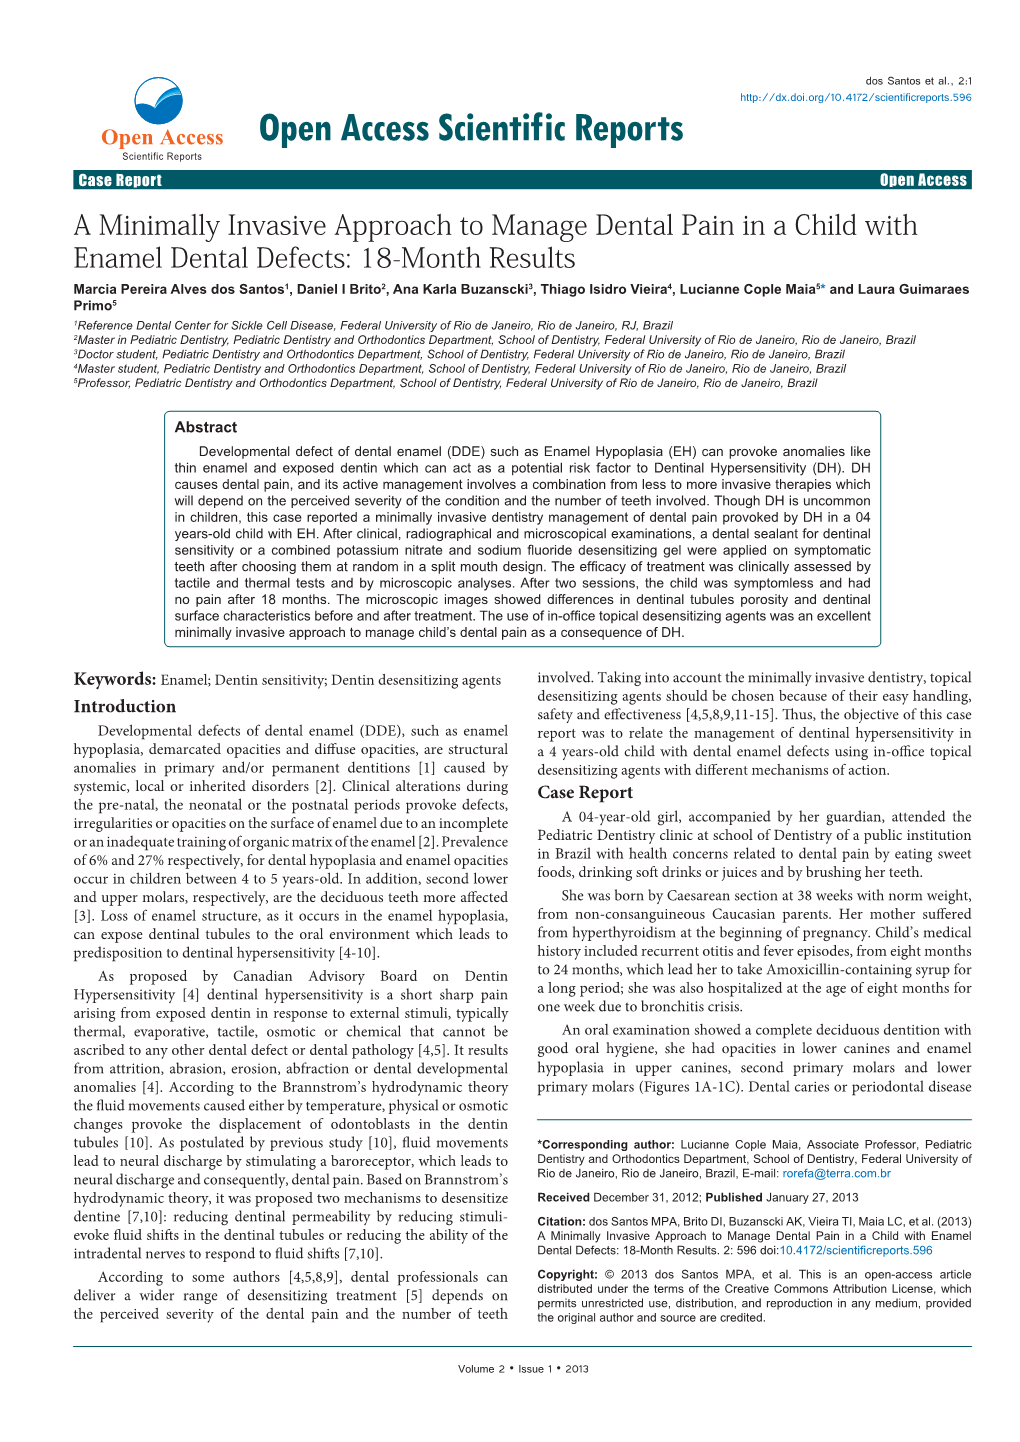 A Minimally Invasive Approach to Manage Dental Pain in a Child With